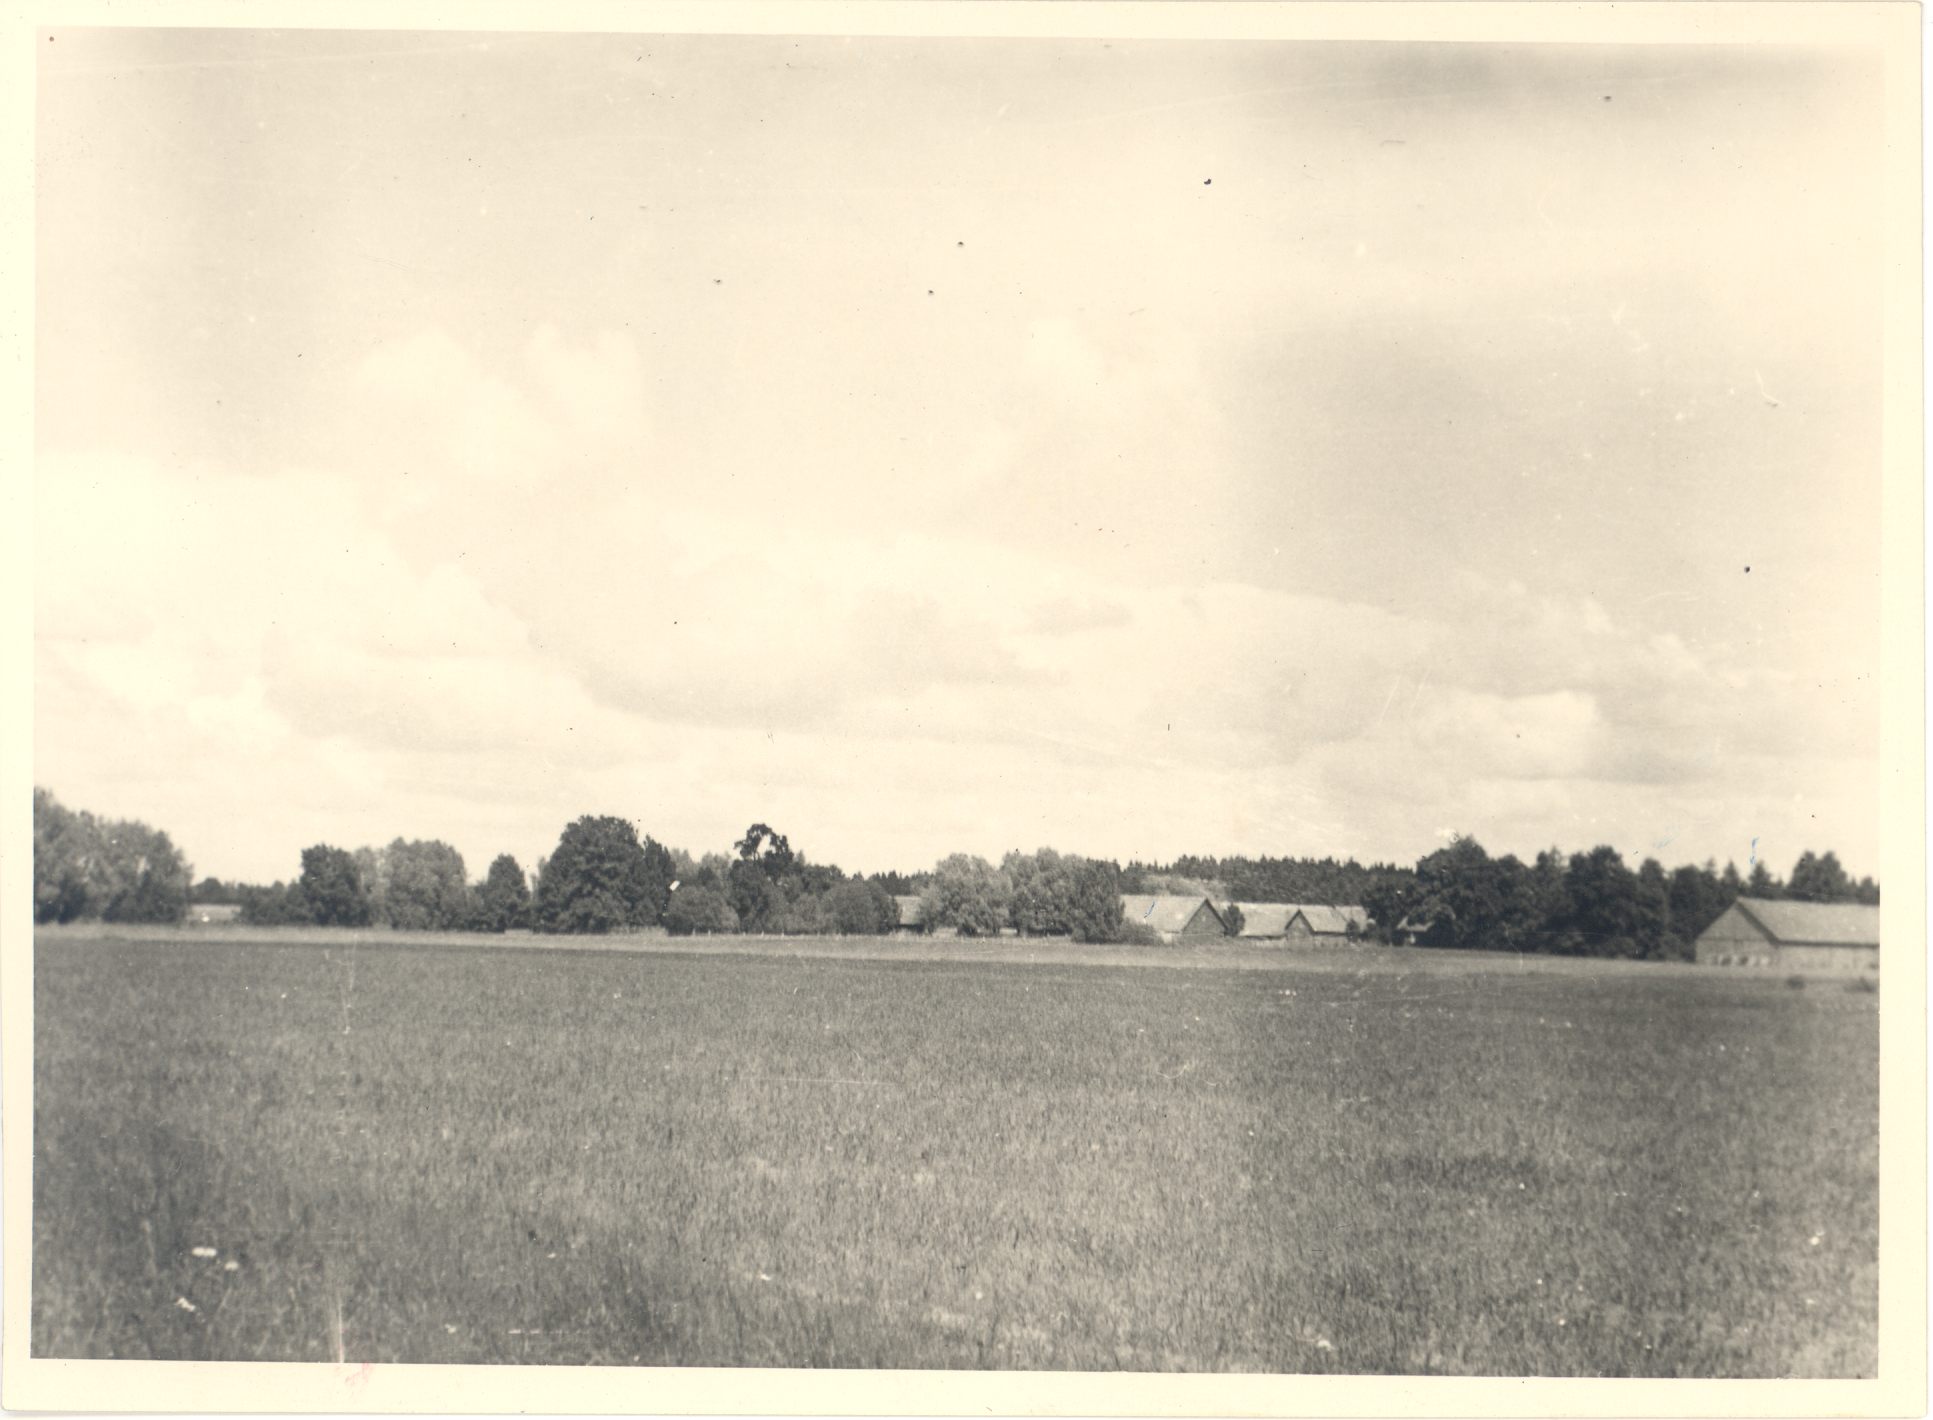 Puldre farm in Laatre. In the forefront of the field where the servants house \x96 yr. Kitzberg's birthplace was located